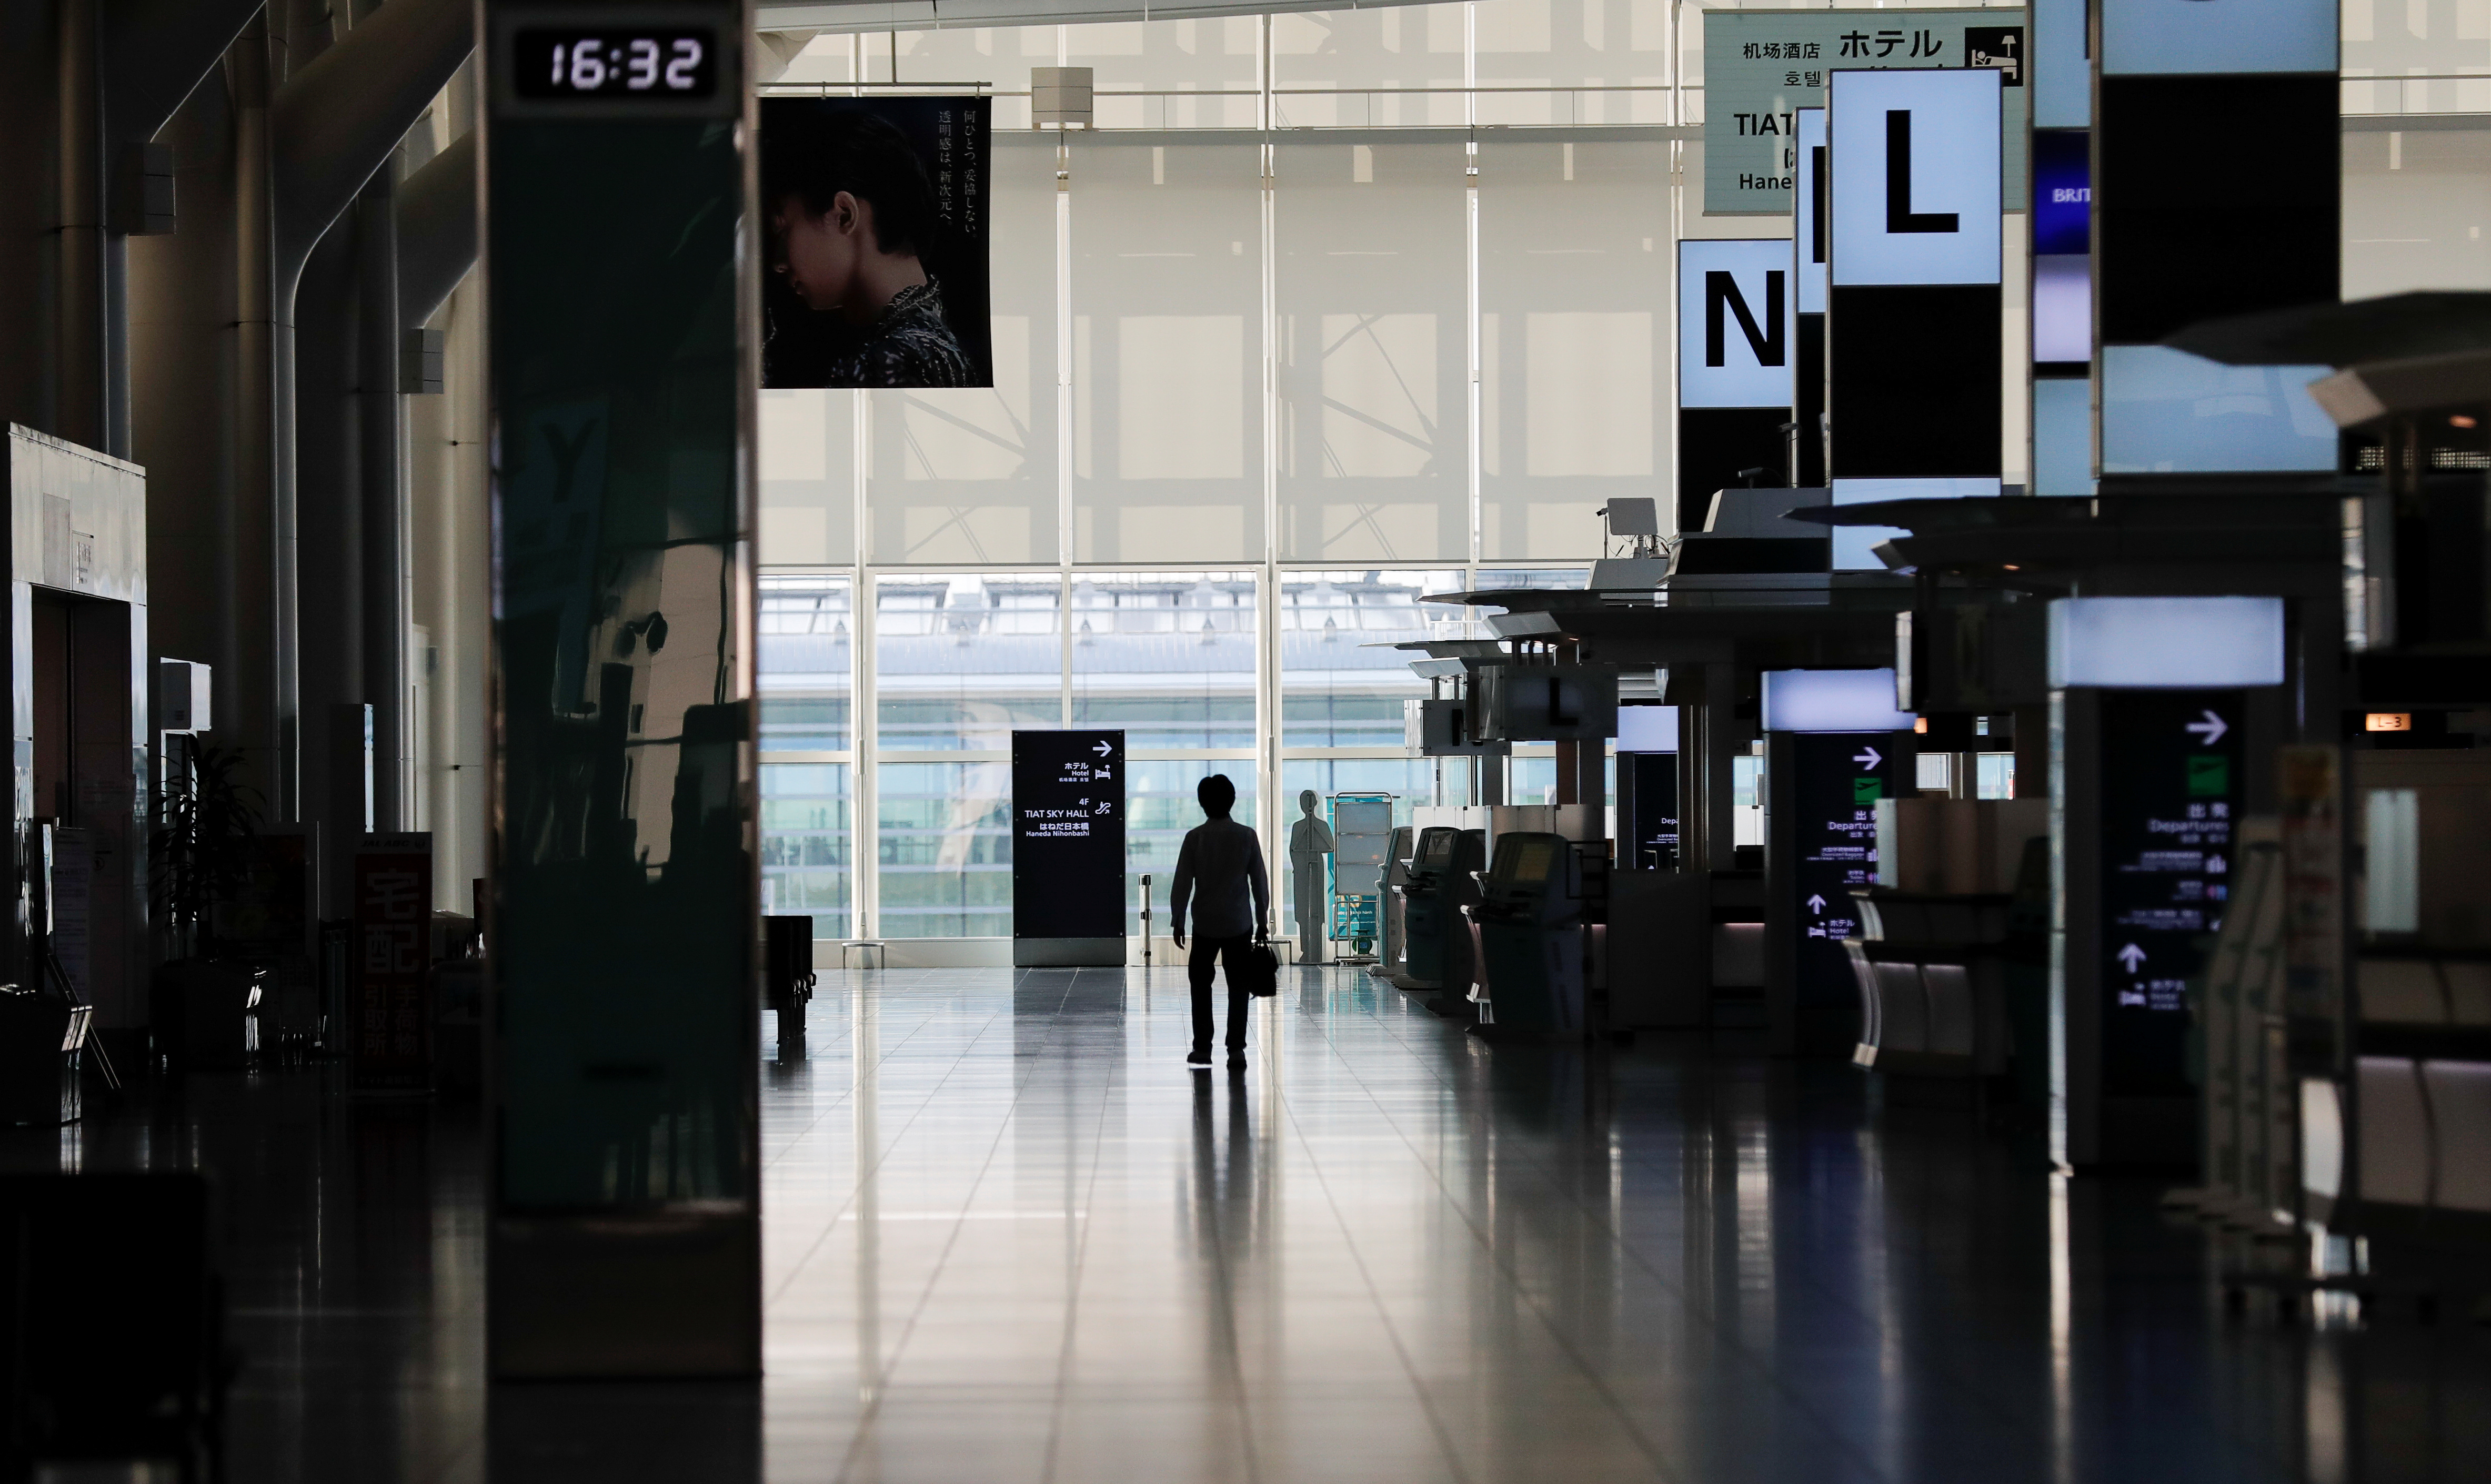 A person stands in an almost empty terminal of Tokyo's Haneda Airport in late April. Starting Tuesday, Japan is set to lift its entry restrictions on foreign residents, allowing those who left before the strict coronavirus curbs were imposed to return, and those planning to leave temporarily to proceed without fear of being locked out. | REUTERS